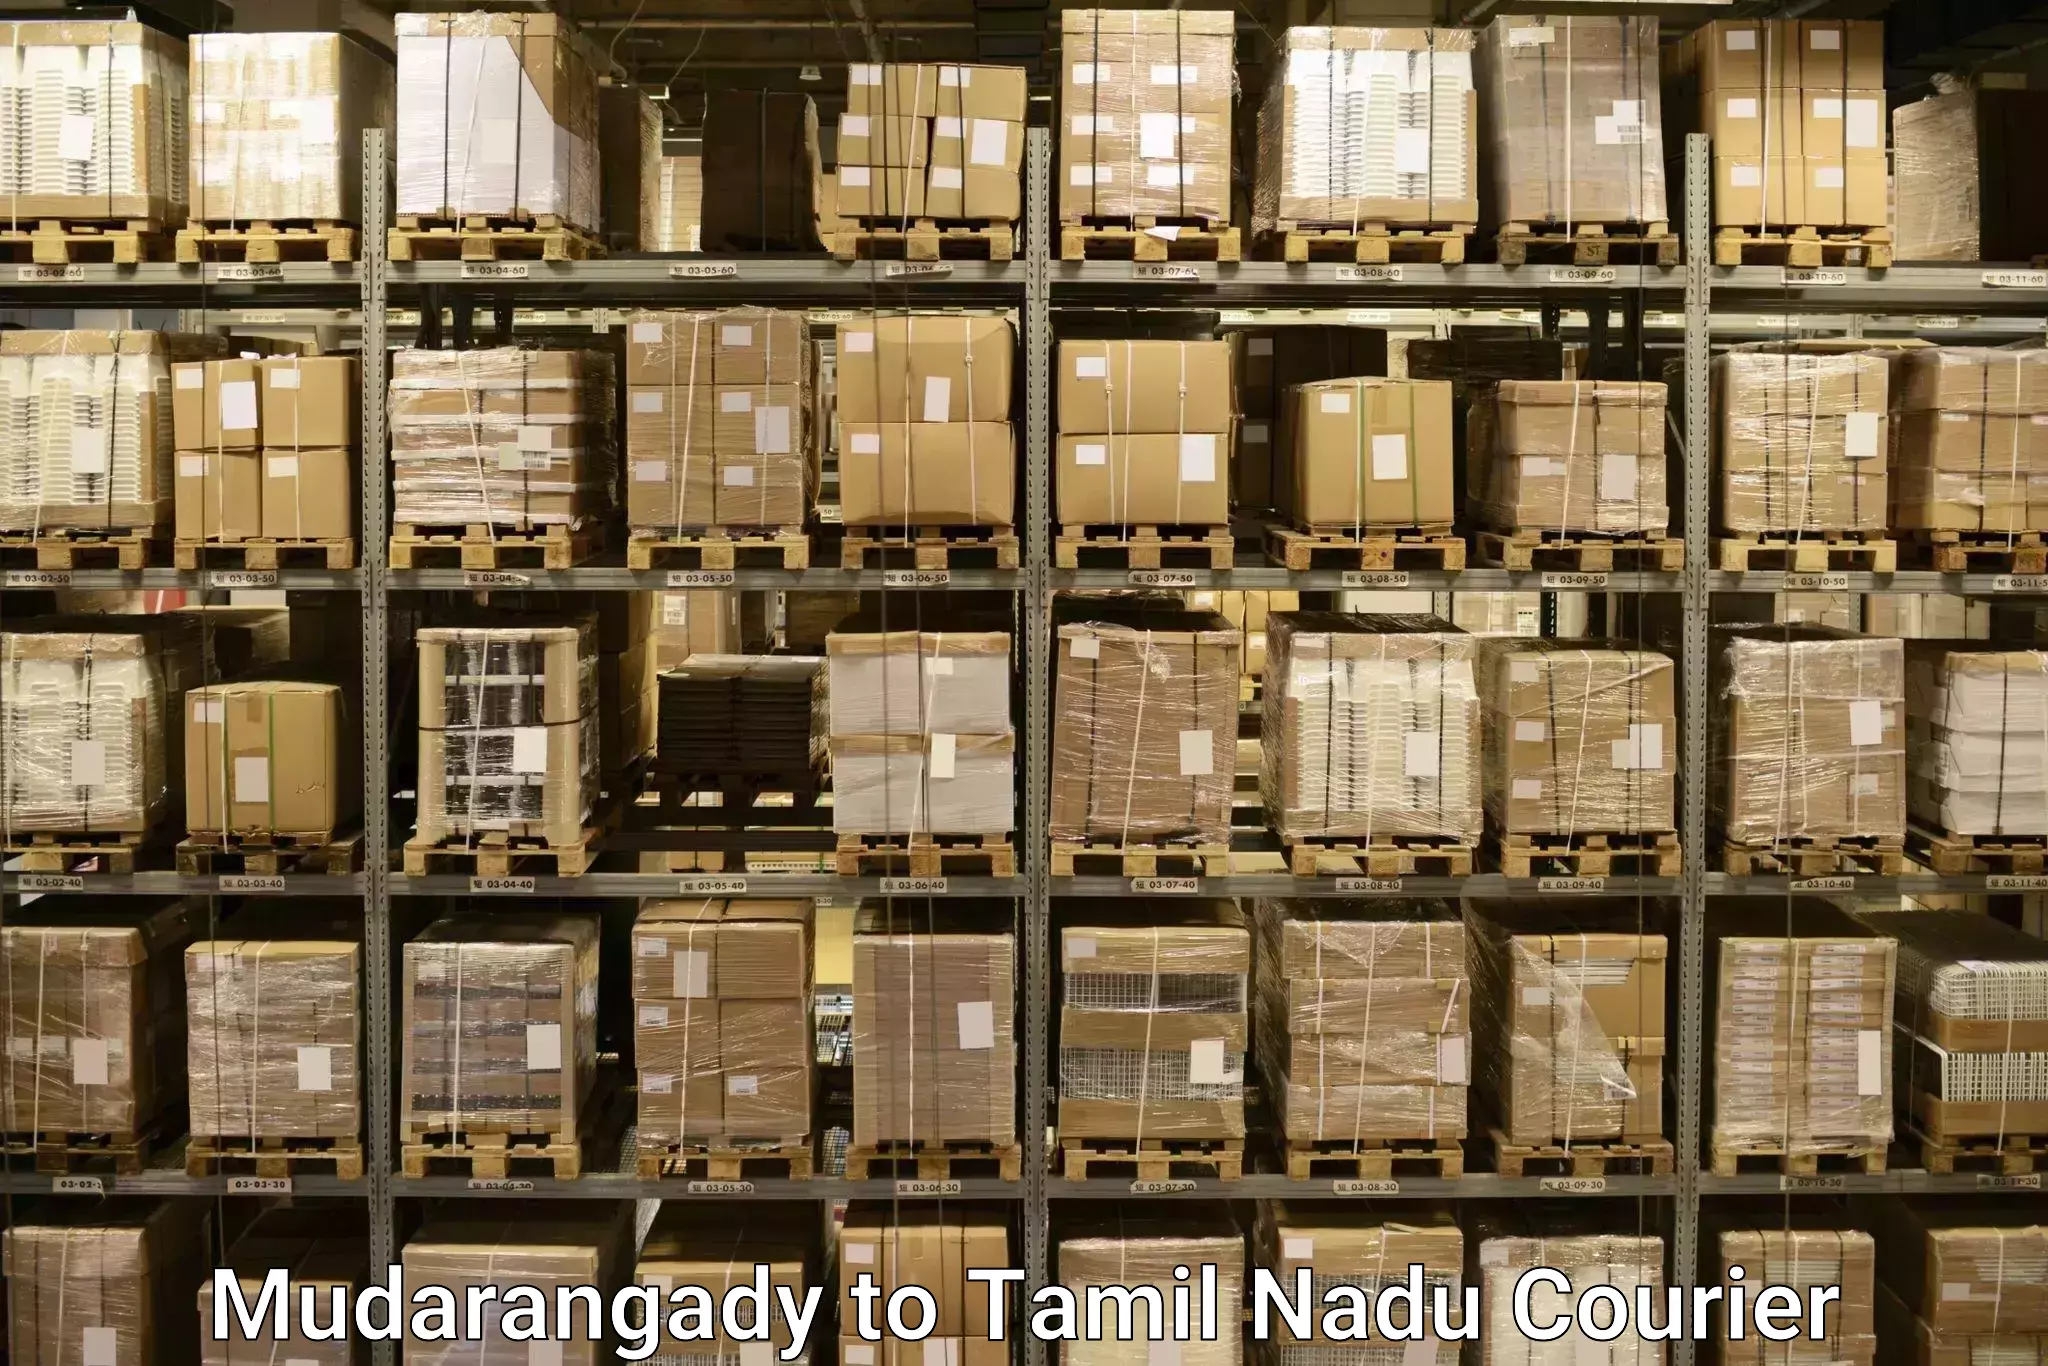 Luggage shipment specialists Mudarangady to Tiruppur